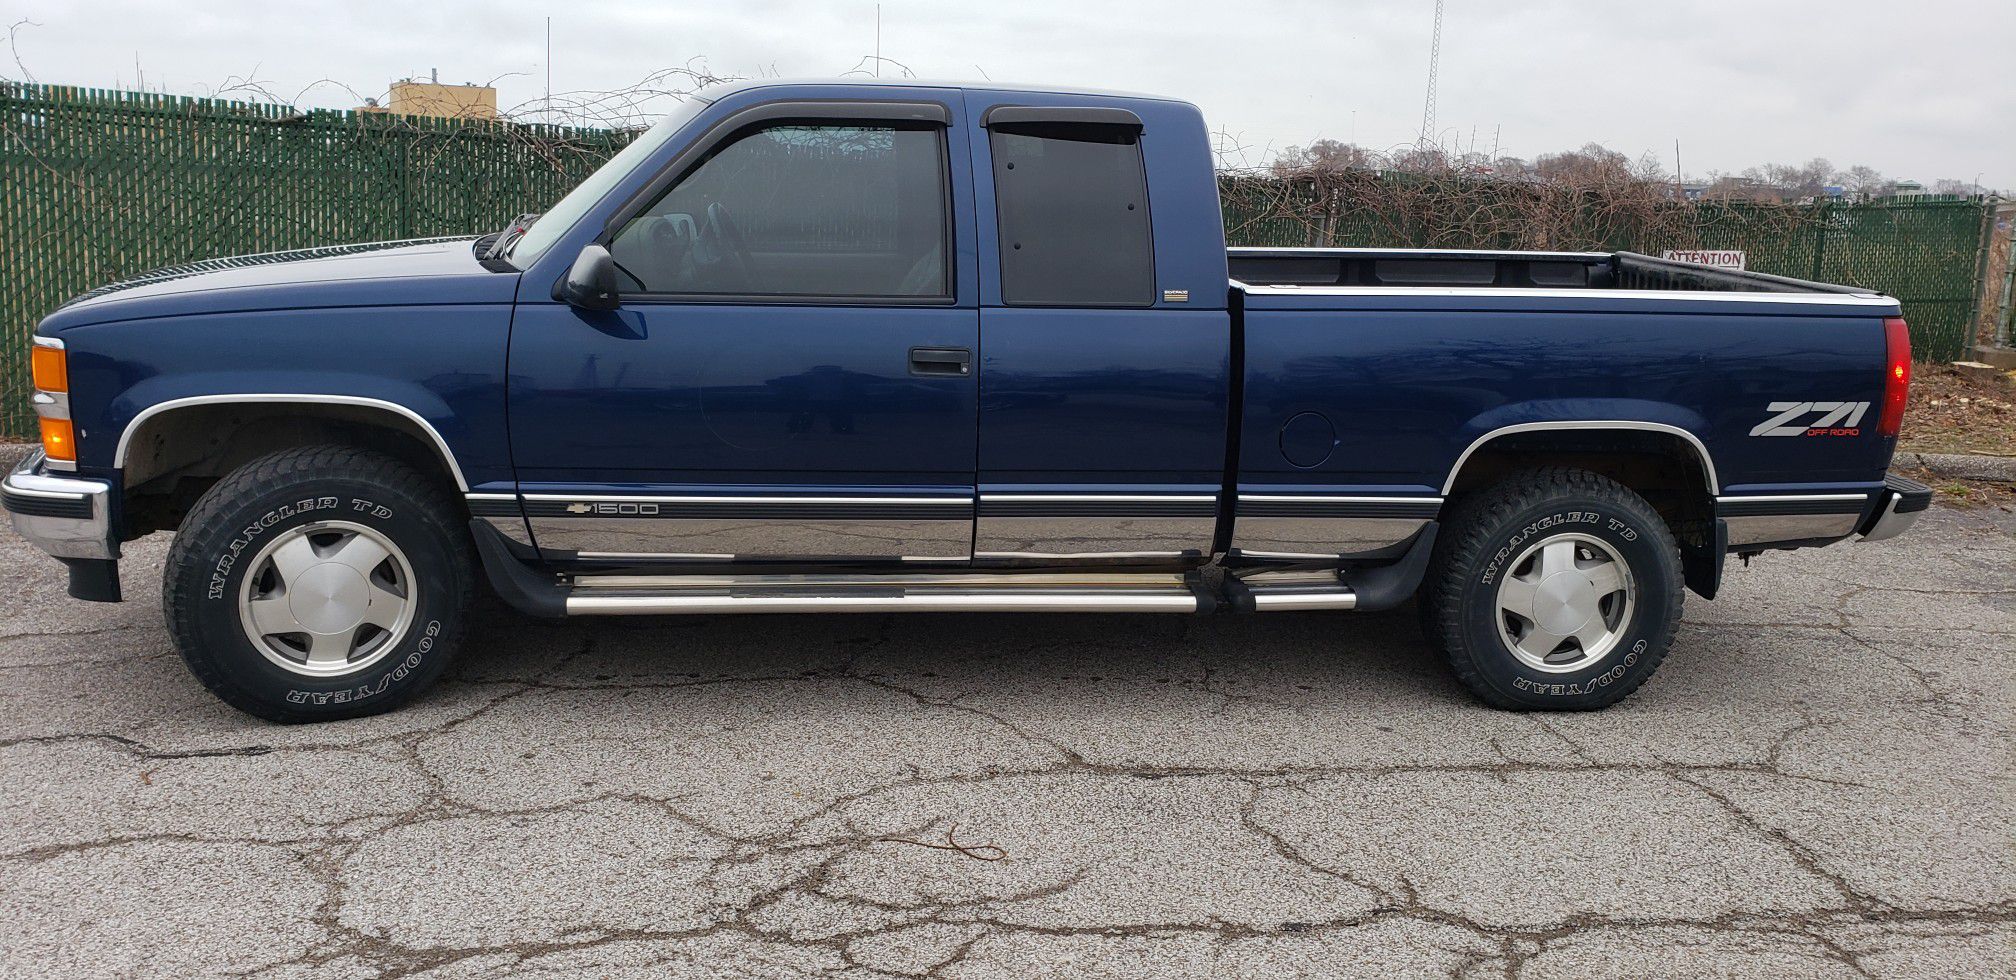 Local Municipality Auction Online- Chevy 1500 and other Vehicles